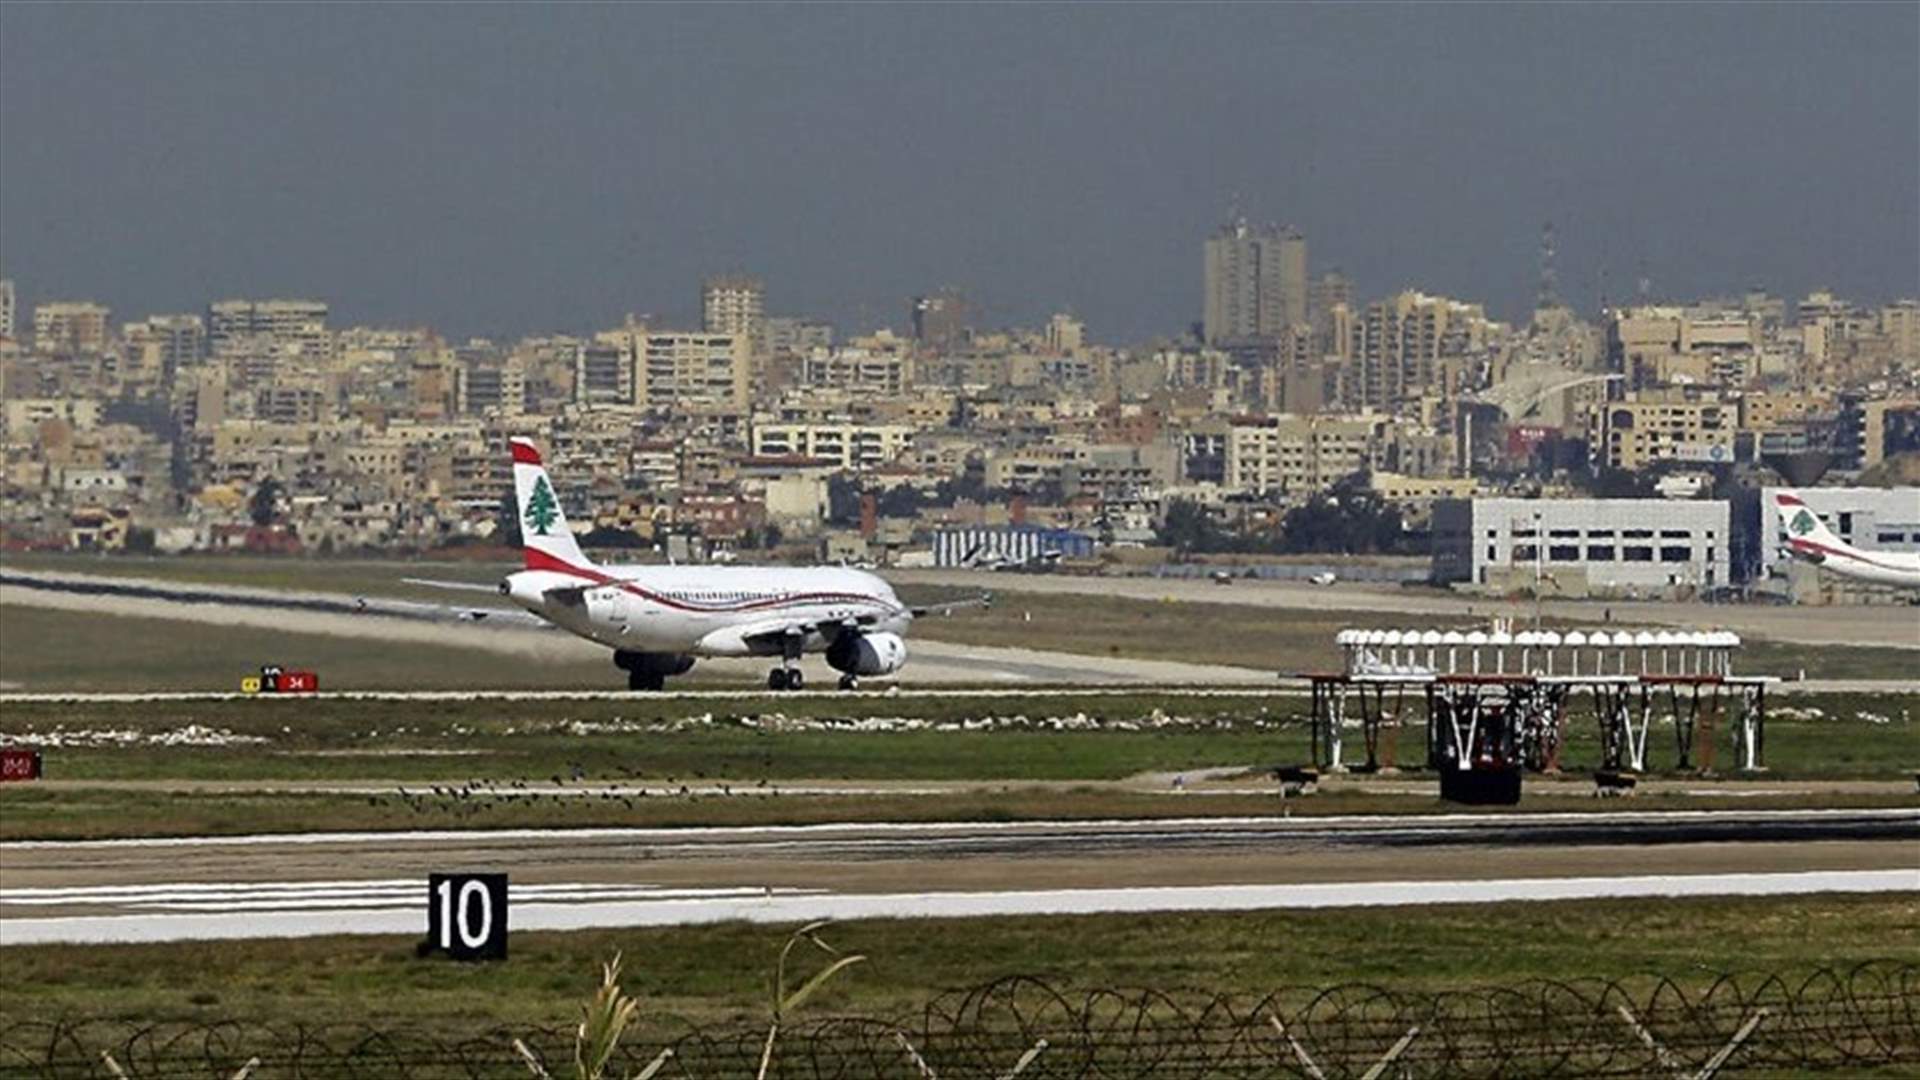 MEA flight carrying 122 Lebanese nationals arrives in Beirut